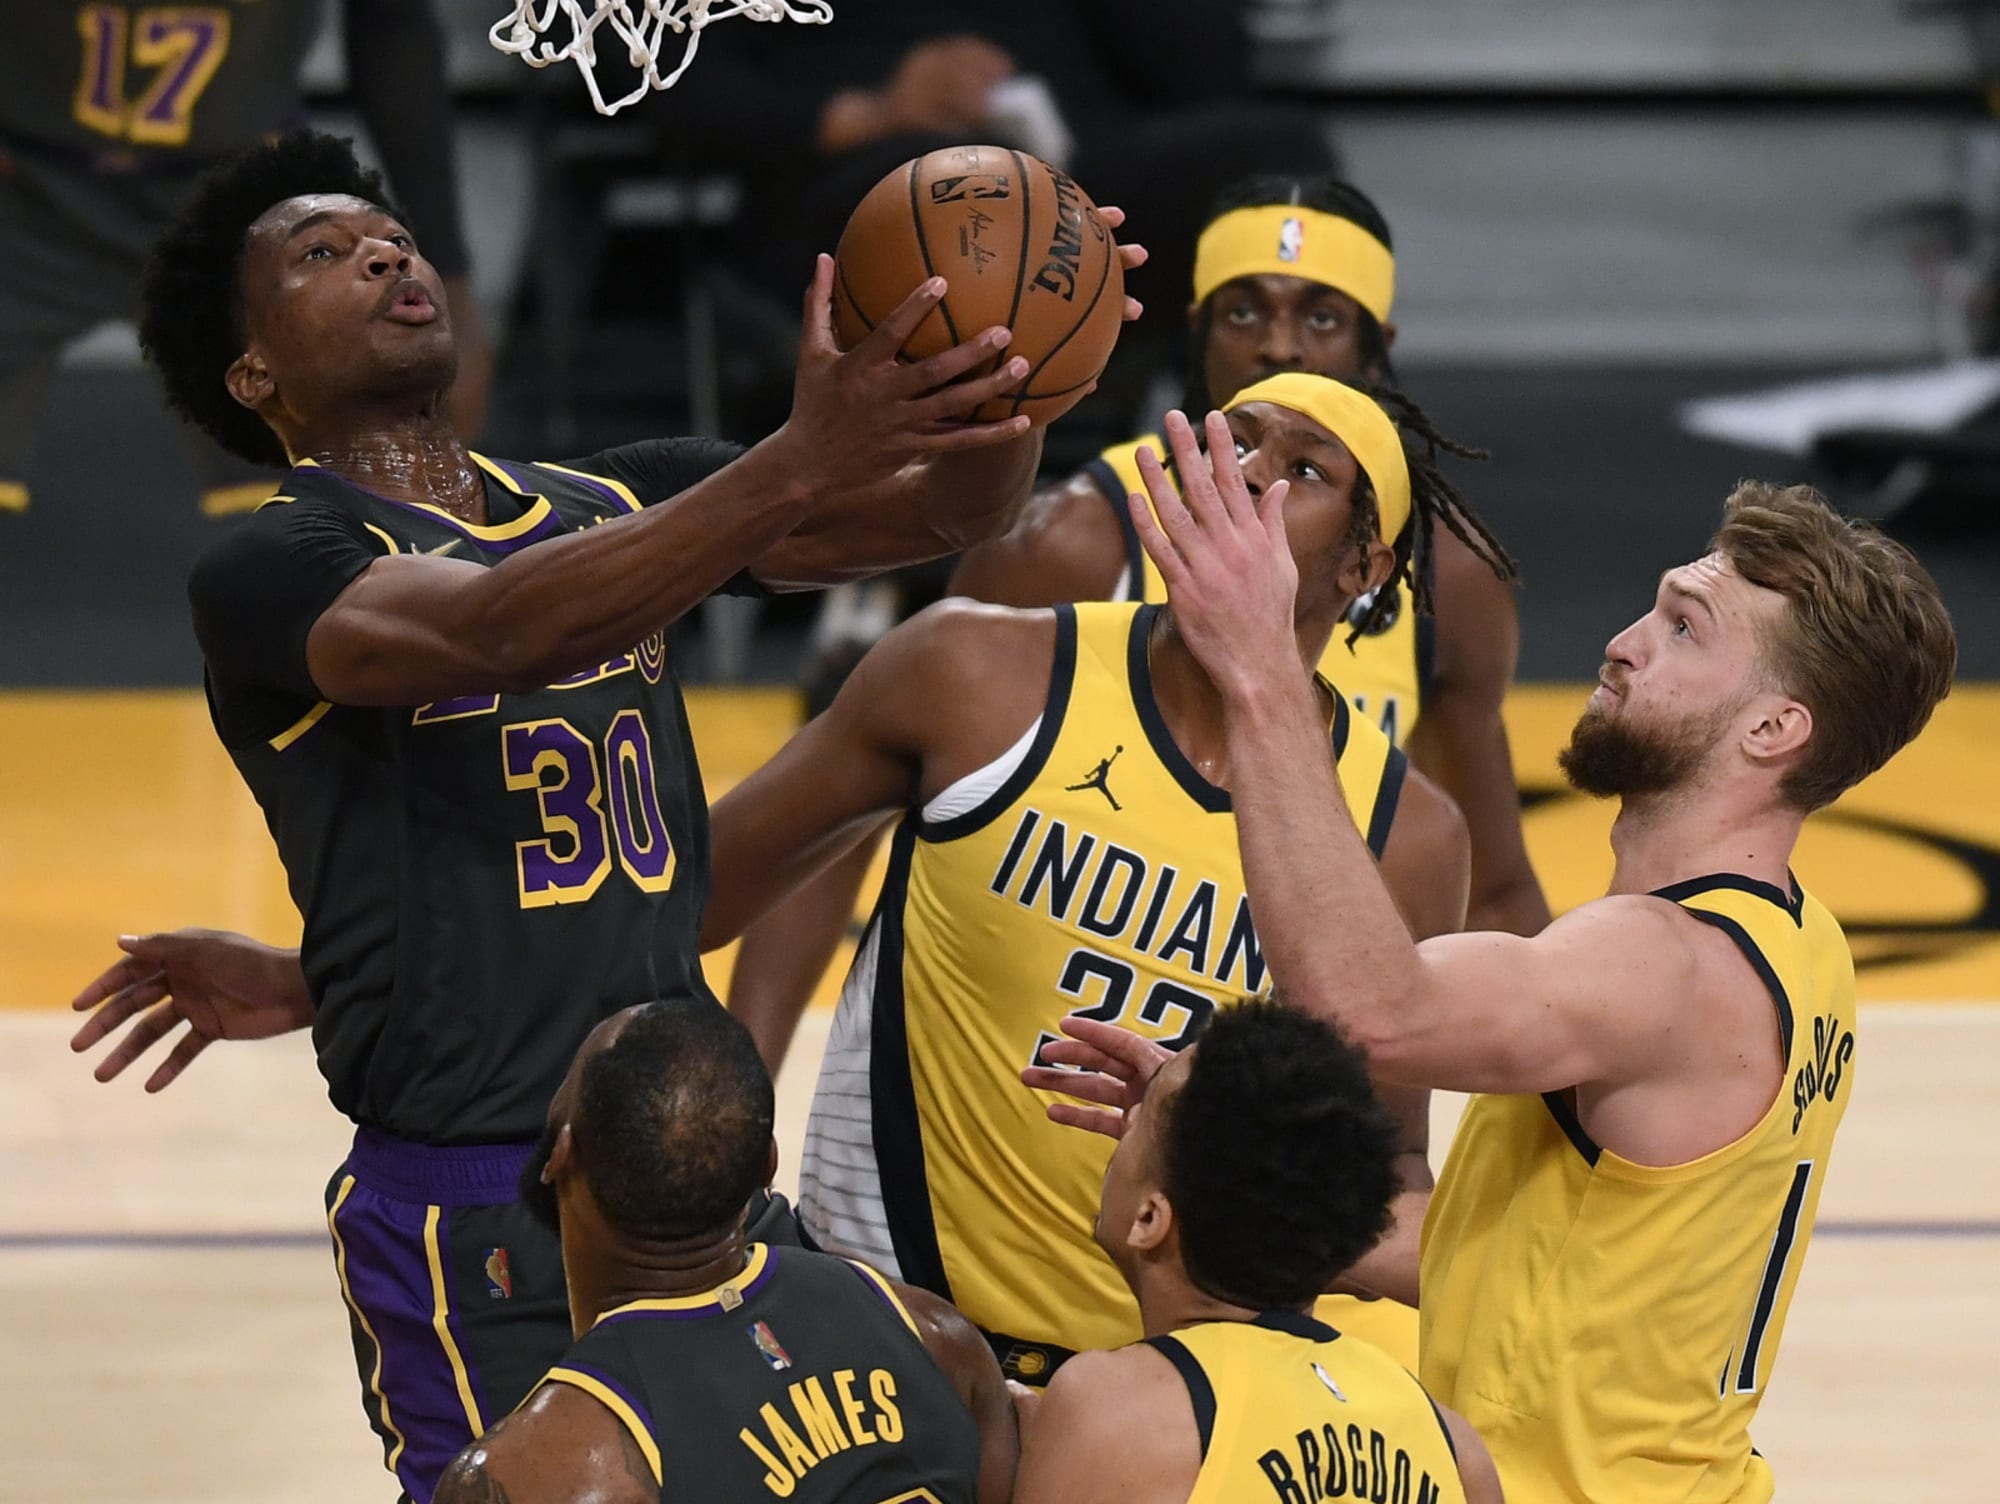 Lakers News: Will Damian Jones Become A Long-Range Threat? - All Lakers